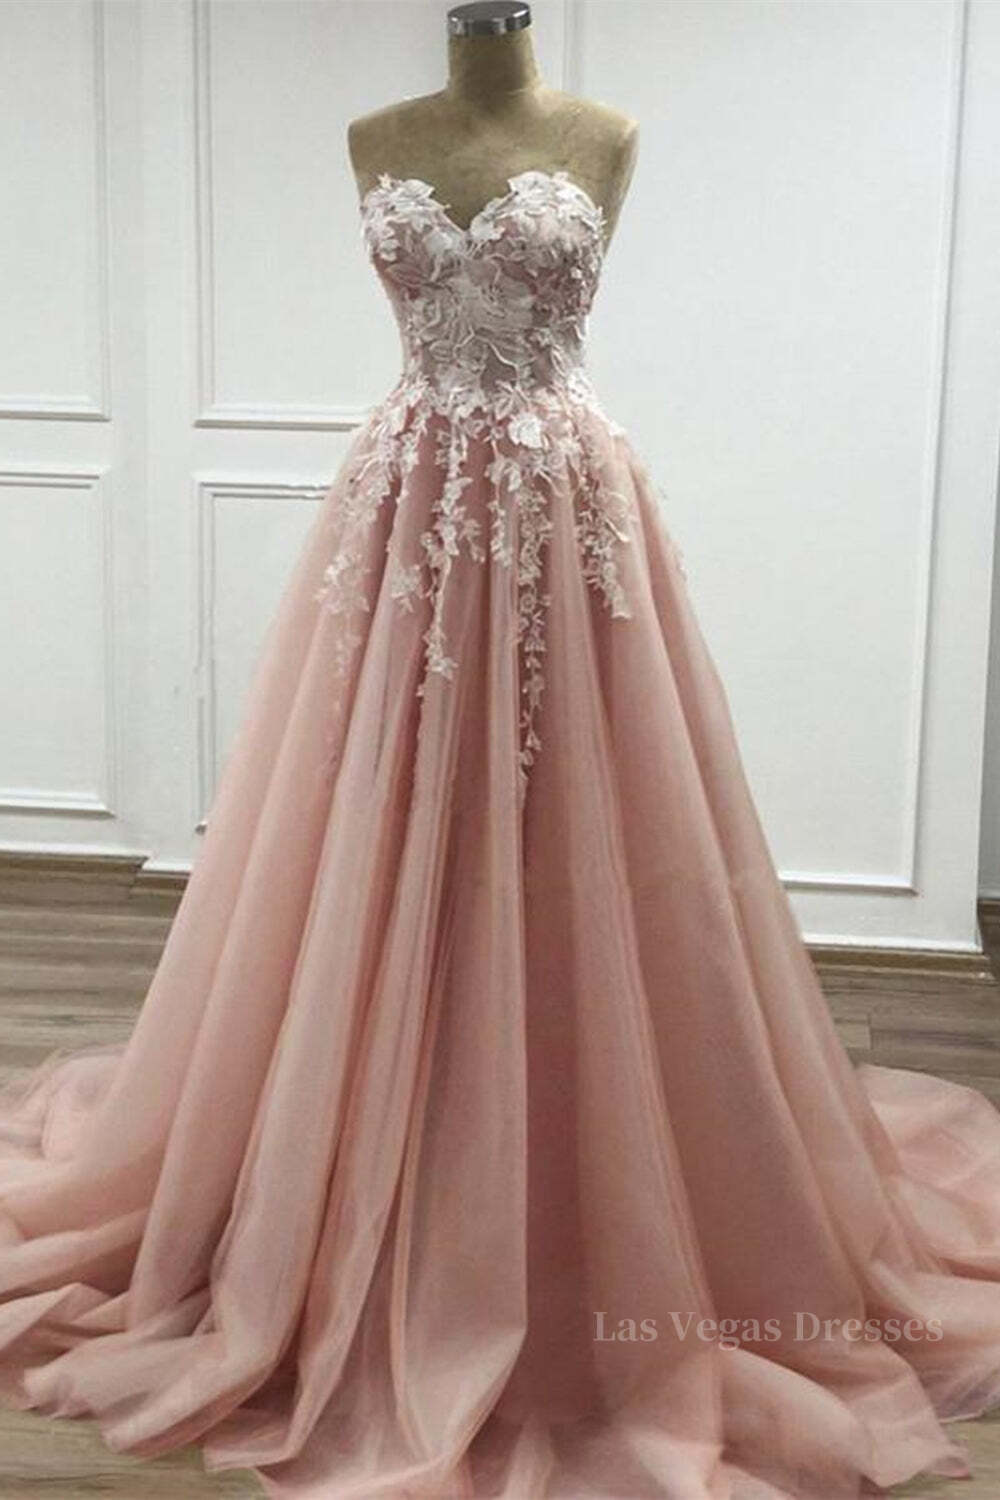 Strapless Sweetheart Neck Pink Lace Appliques Long Prom Dress, Pink Lace Floral Formal Dress, Pink Evening Dress